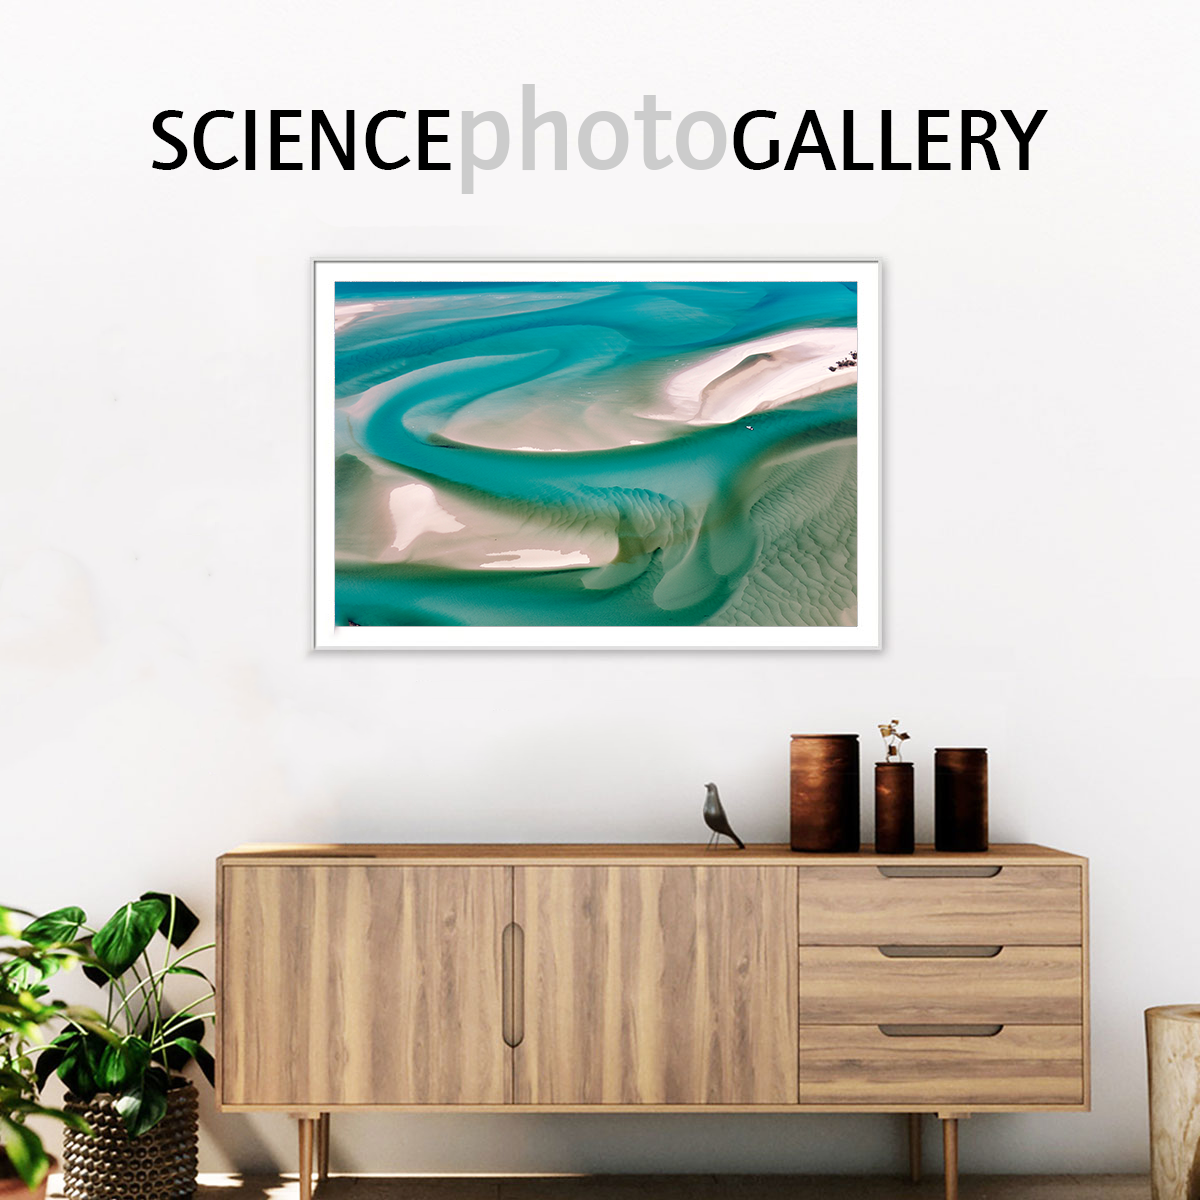 Science Photo Gallery